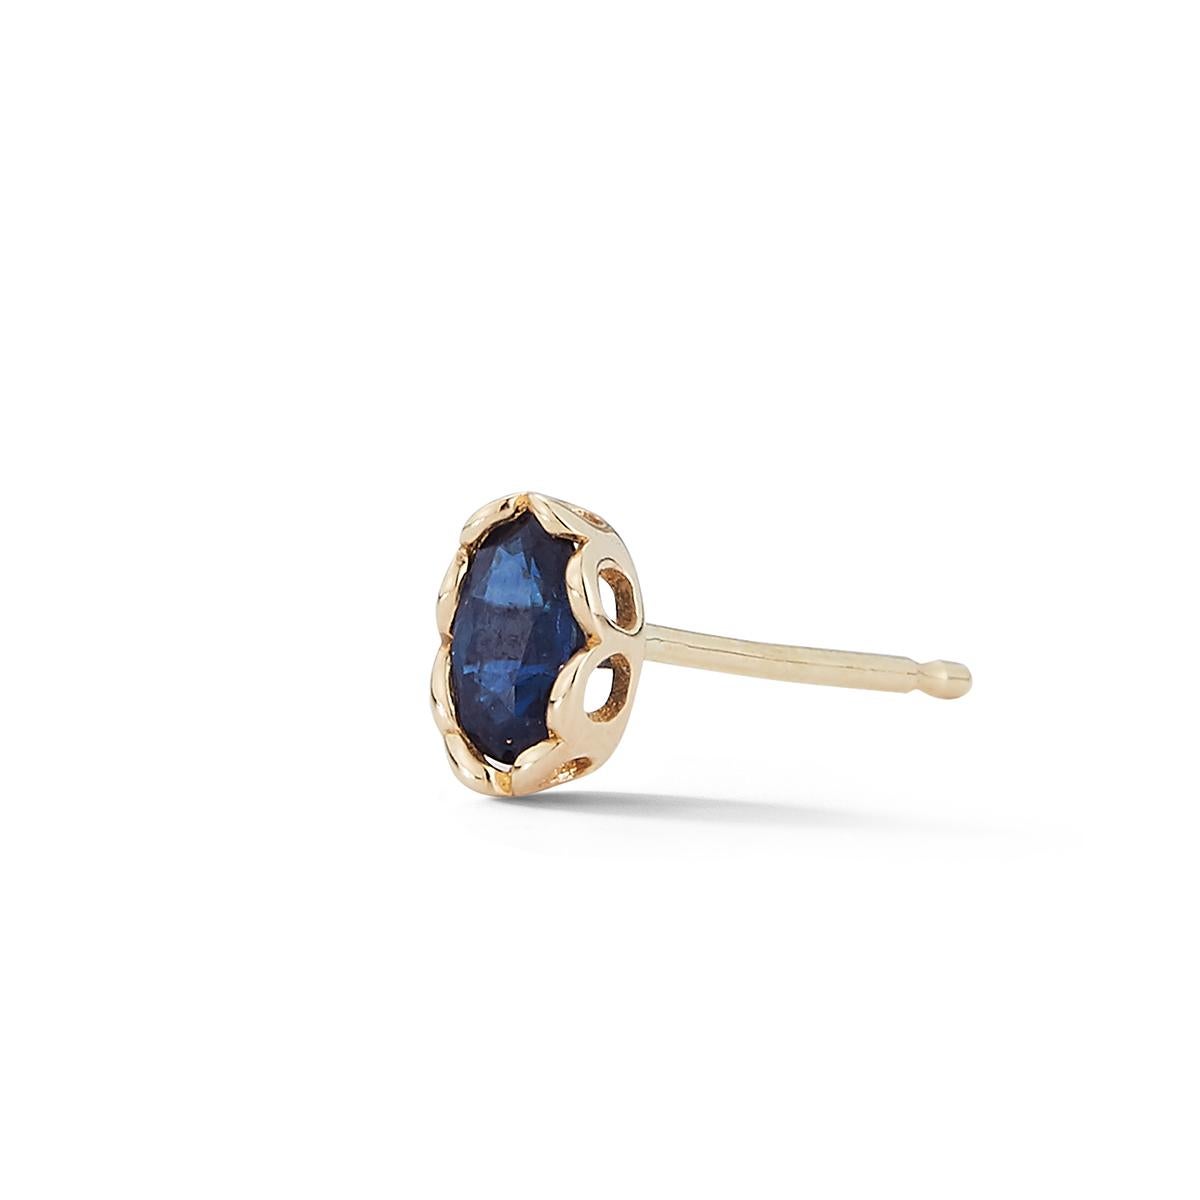 Oval shape Blue Sapphire stone set in a scalloped open work setting.
Easy to wear and great for mixing with your favorite single earrings to update your
ear game. Sold as a SINGLE earring, get two to wear them as a pair.

Inspired by seeing the